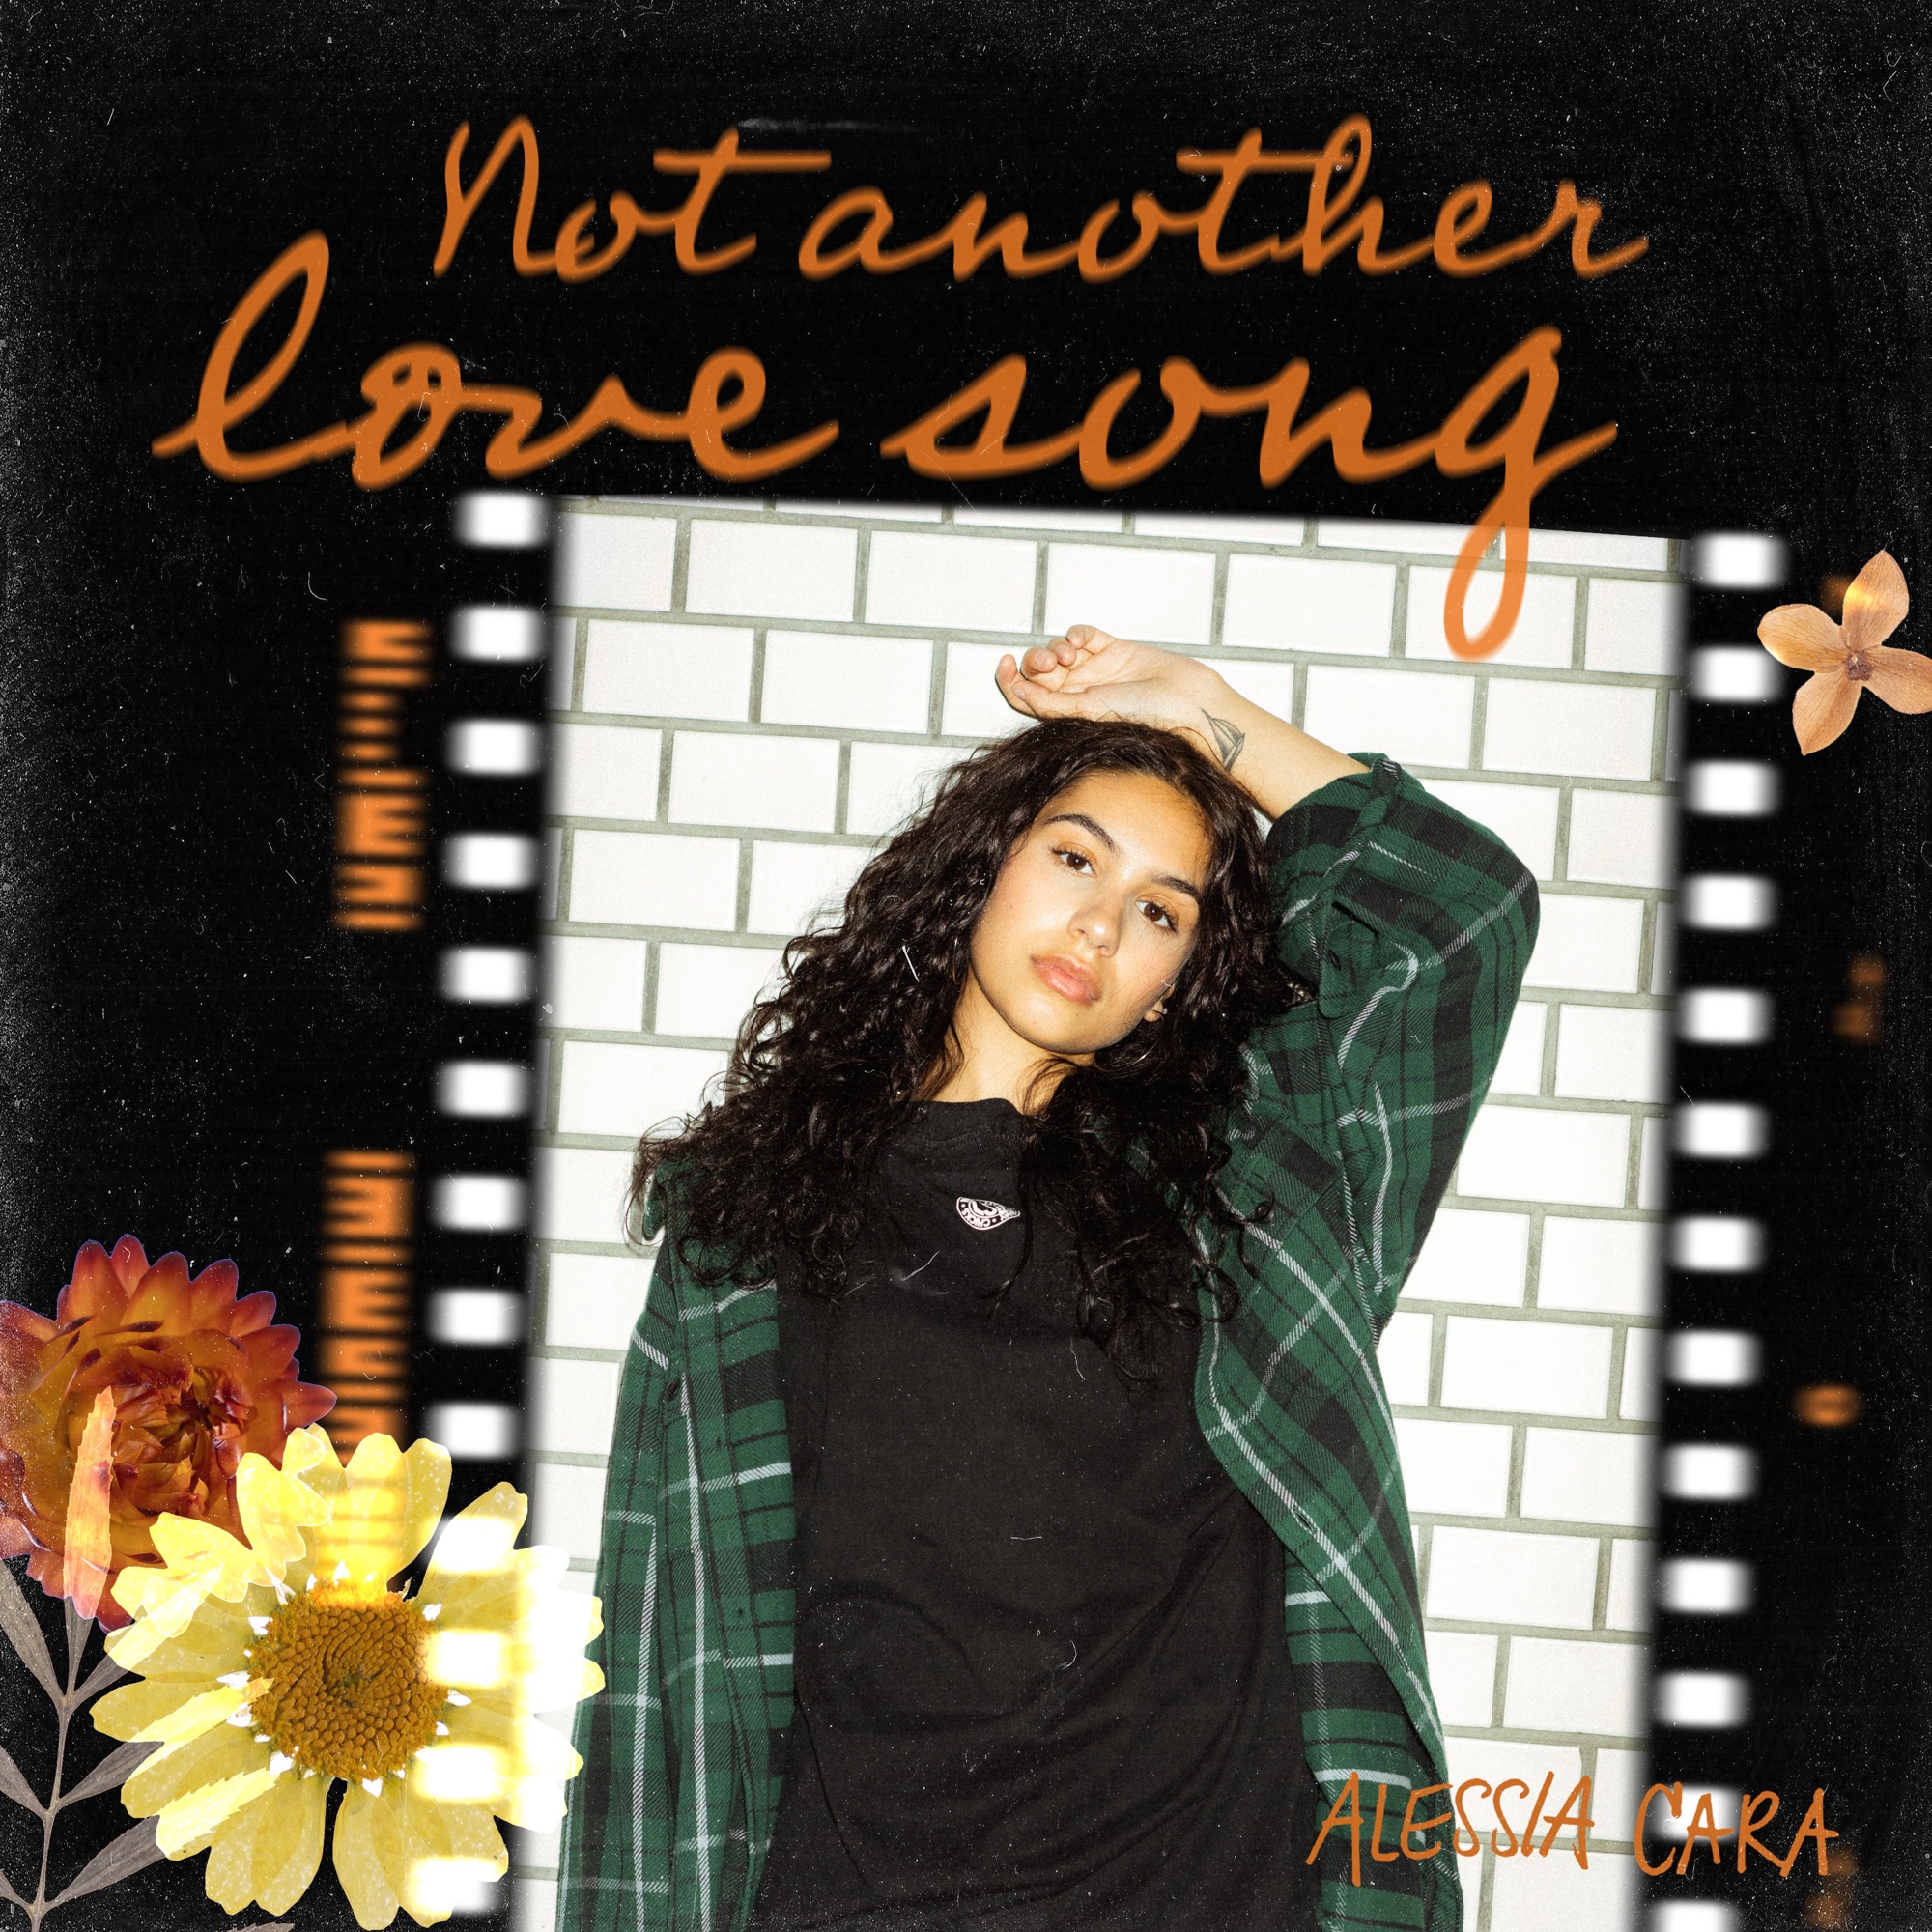 Alessia Cara - Not Another Love Song - EP